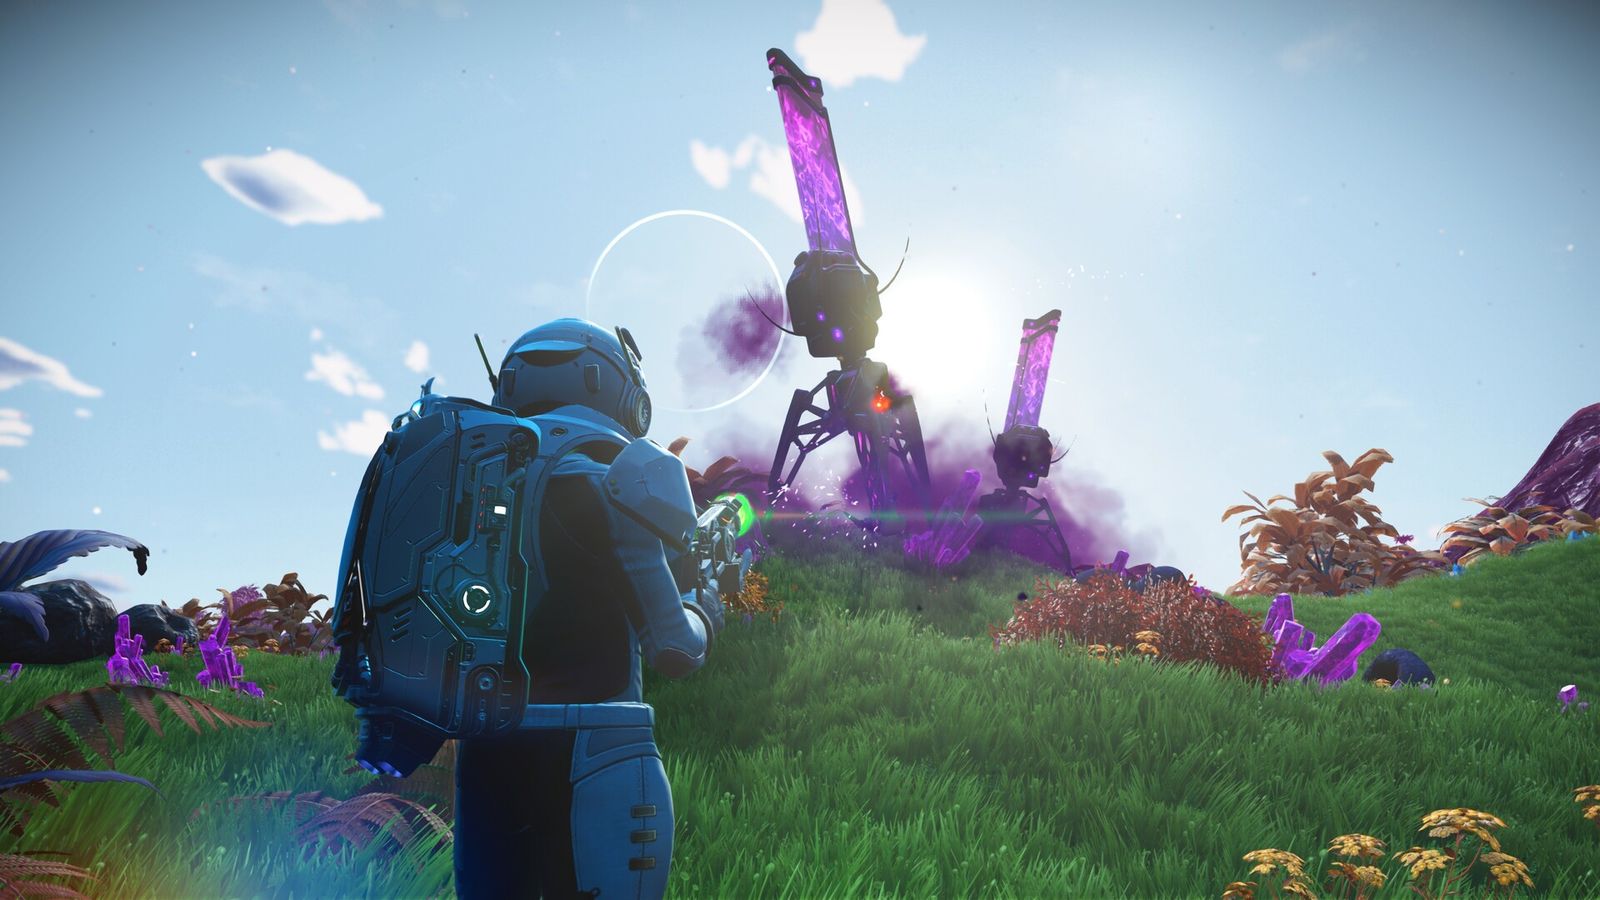 In-game image from No Man's Sky of a character in a space suit aiming at a robot on a grassy planet featuring purple crystals.